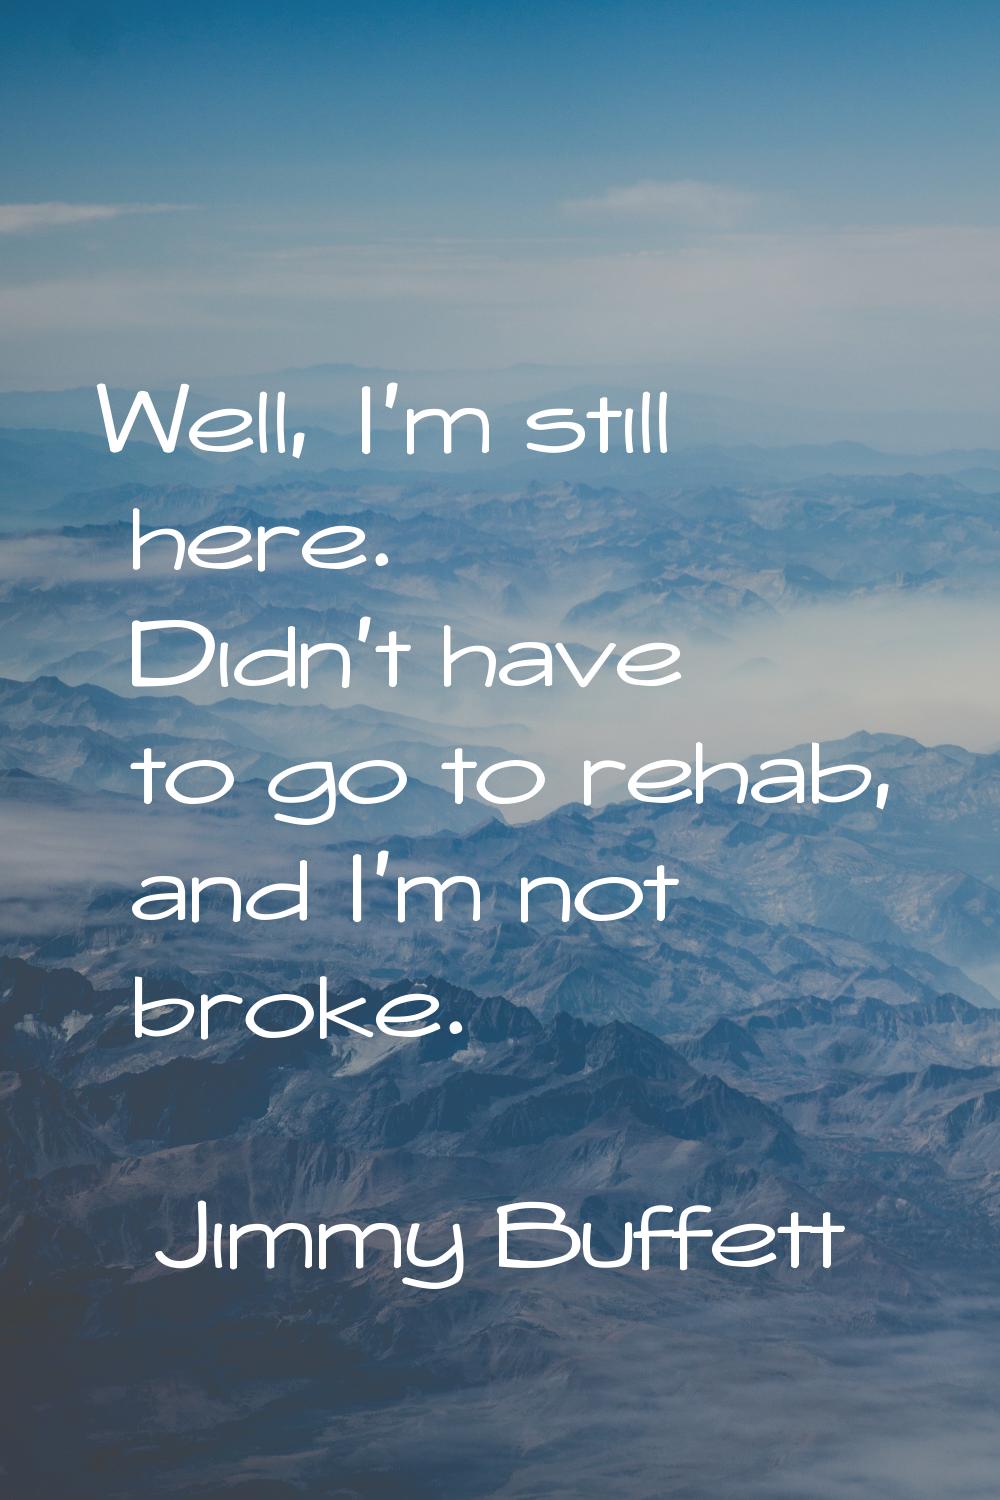 Well, I'm still here. Didn't have to go to rehab, and I'm not broke.